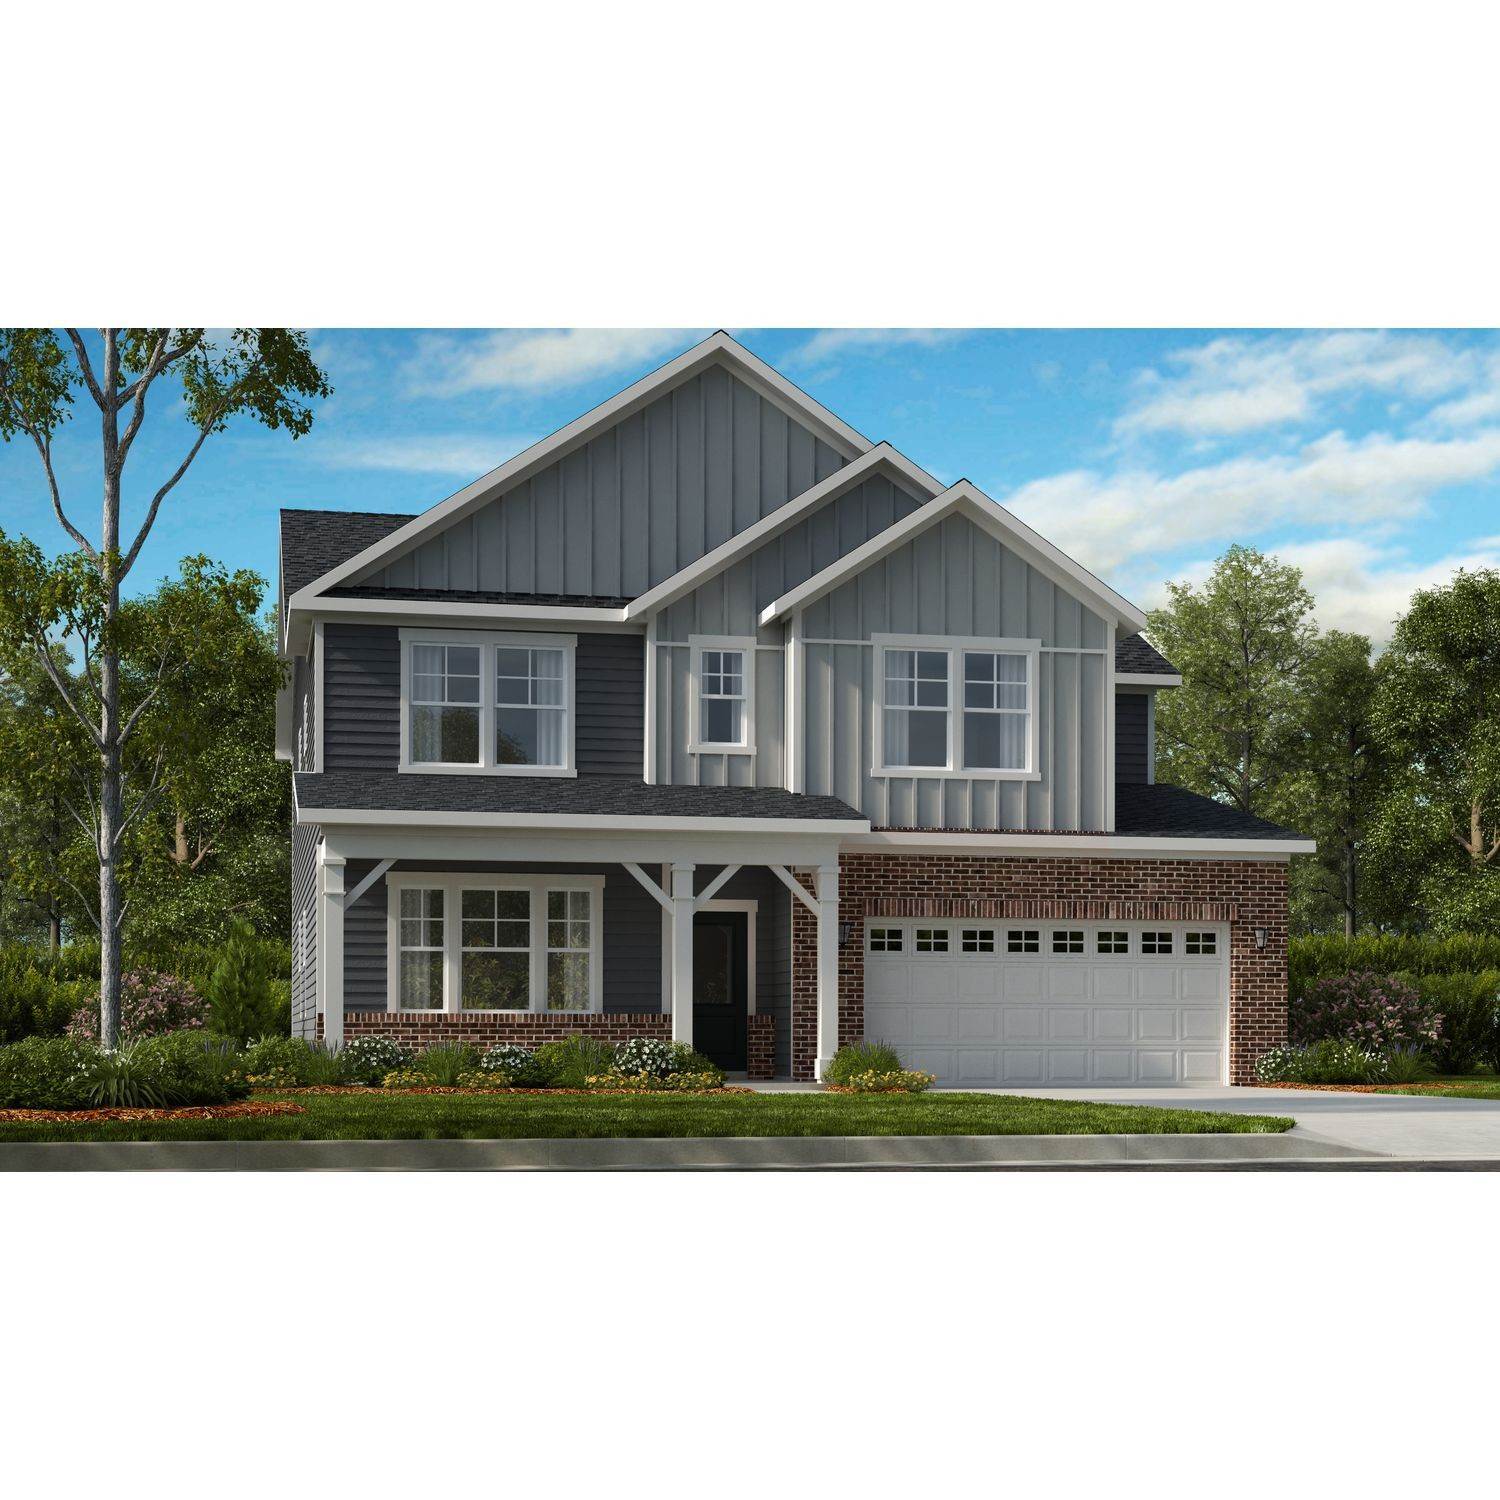 Single Family for Sale at Apex, NC 27523